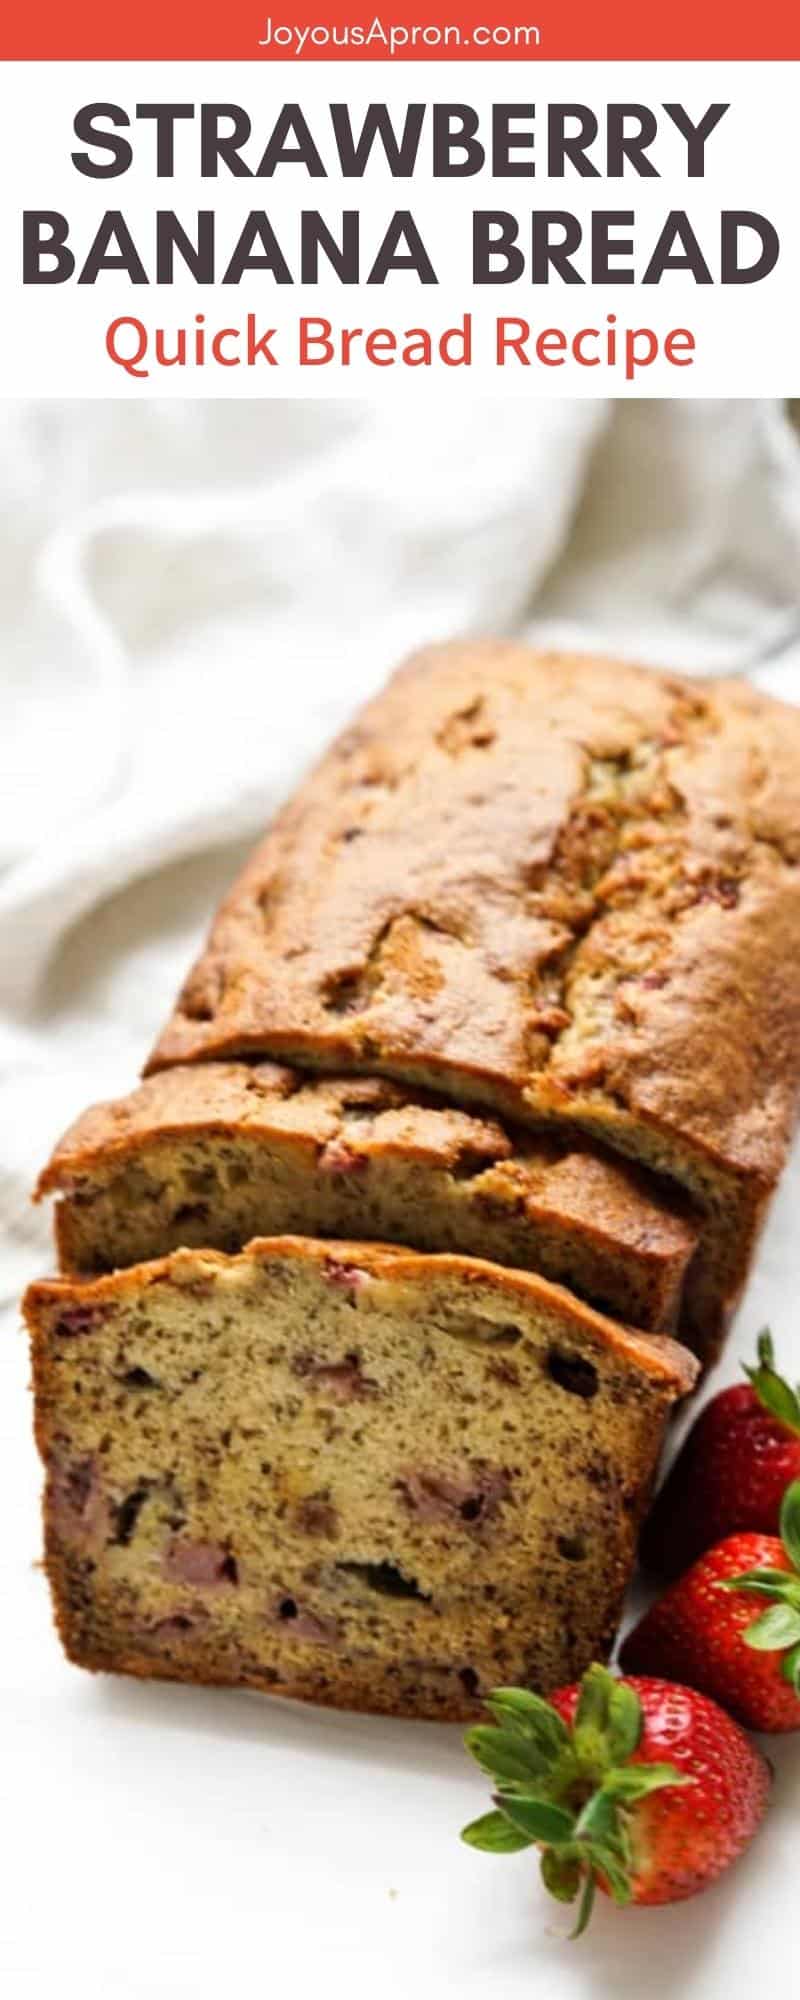 Strawberry Banana Bread - moist, buttery and crumbly banana bread baked with chunks of fresh strawberries. A simple quick bread recipe with cake textures - makes a delicious grab-and-go breakfast or snack! via @joyousapron